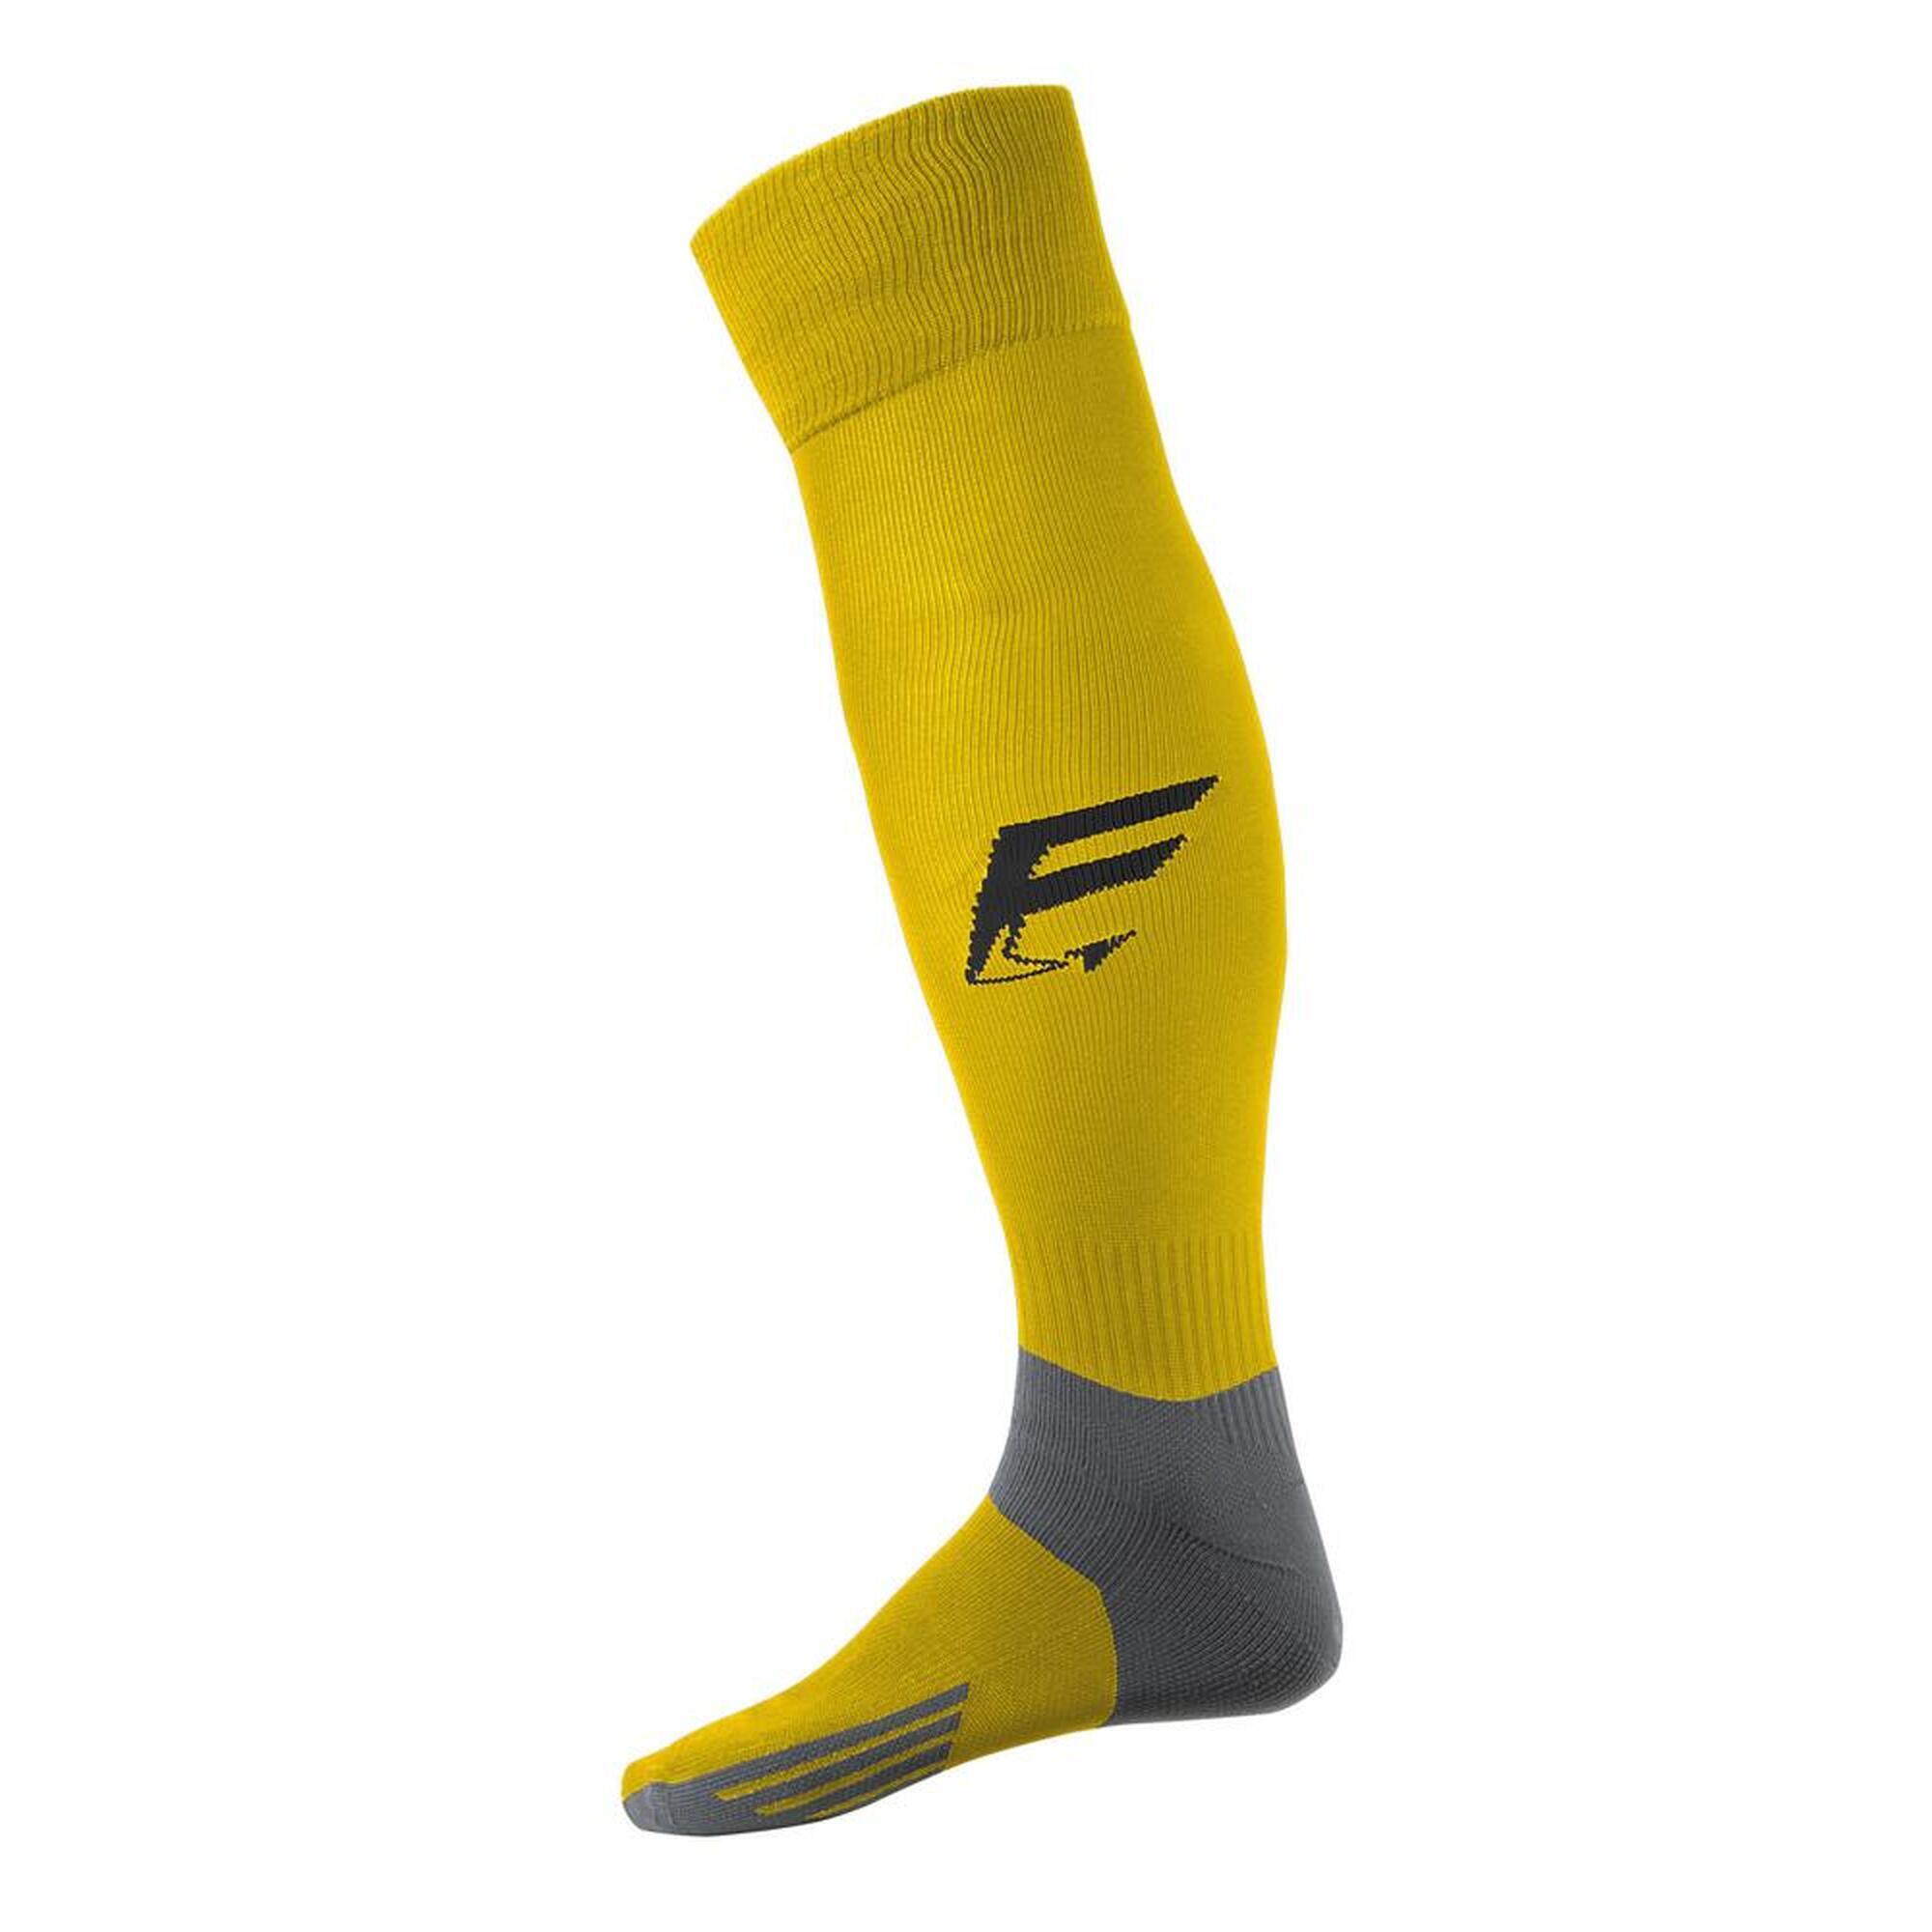 FORCE XV CHAUSSETTES DE RUGBY FORCE Jaune